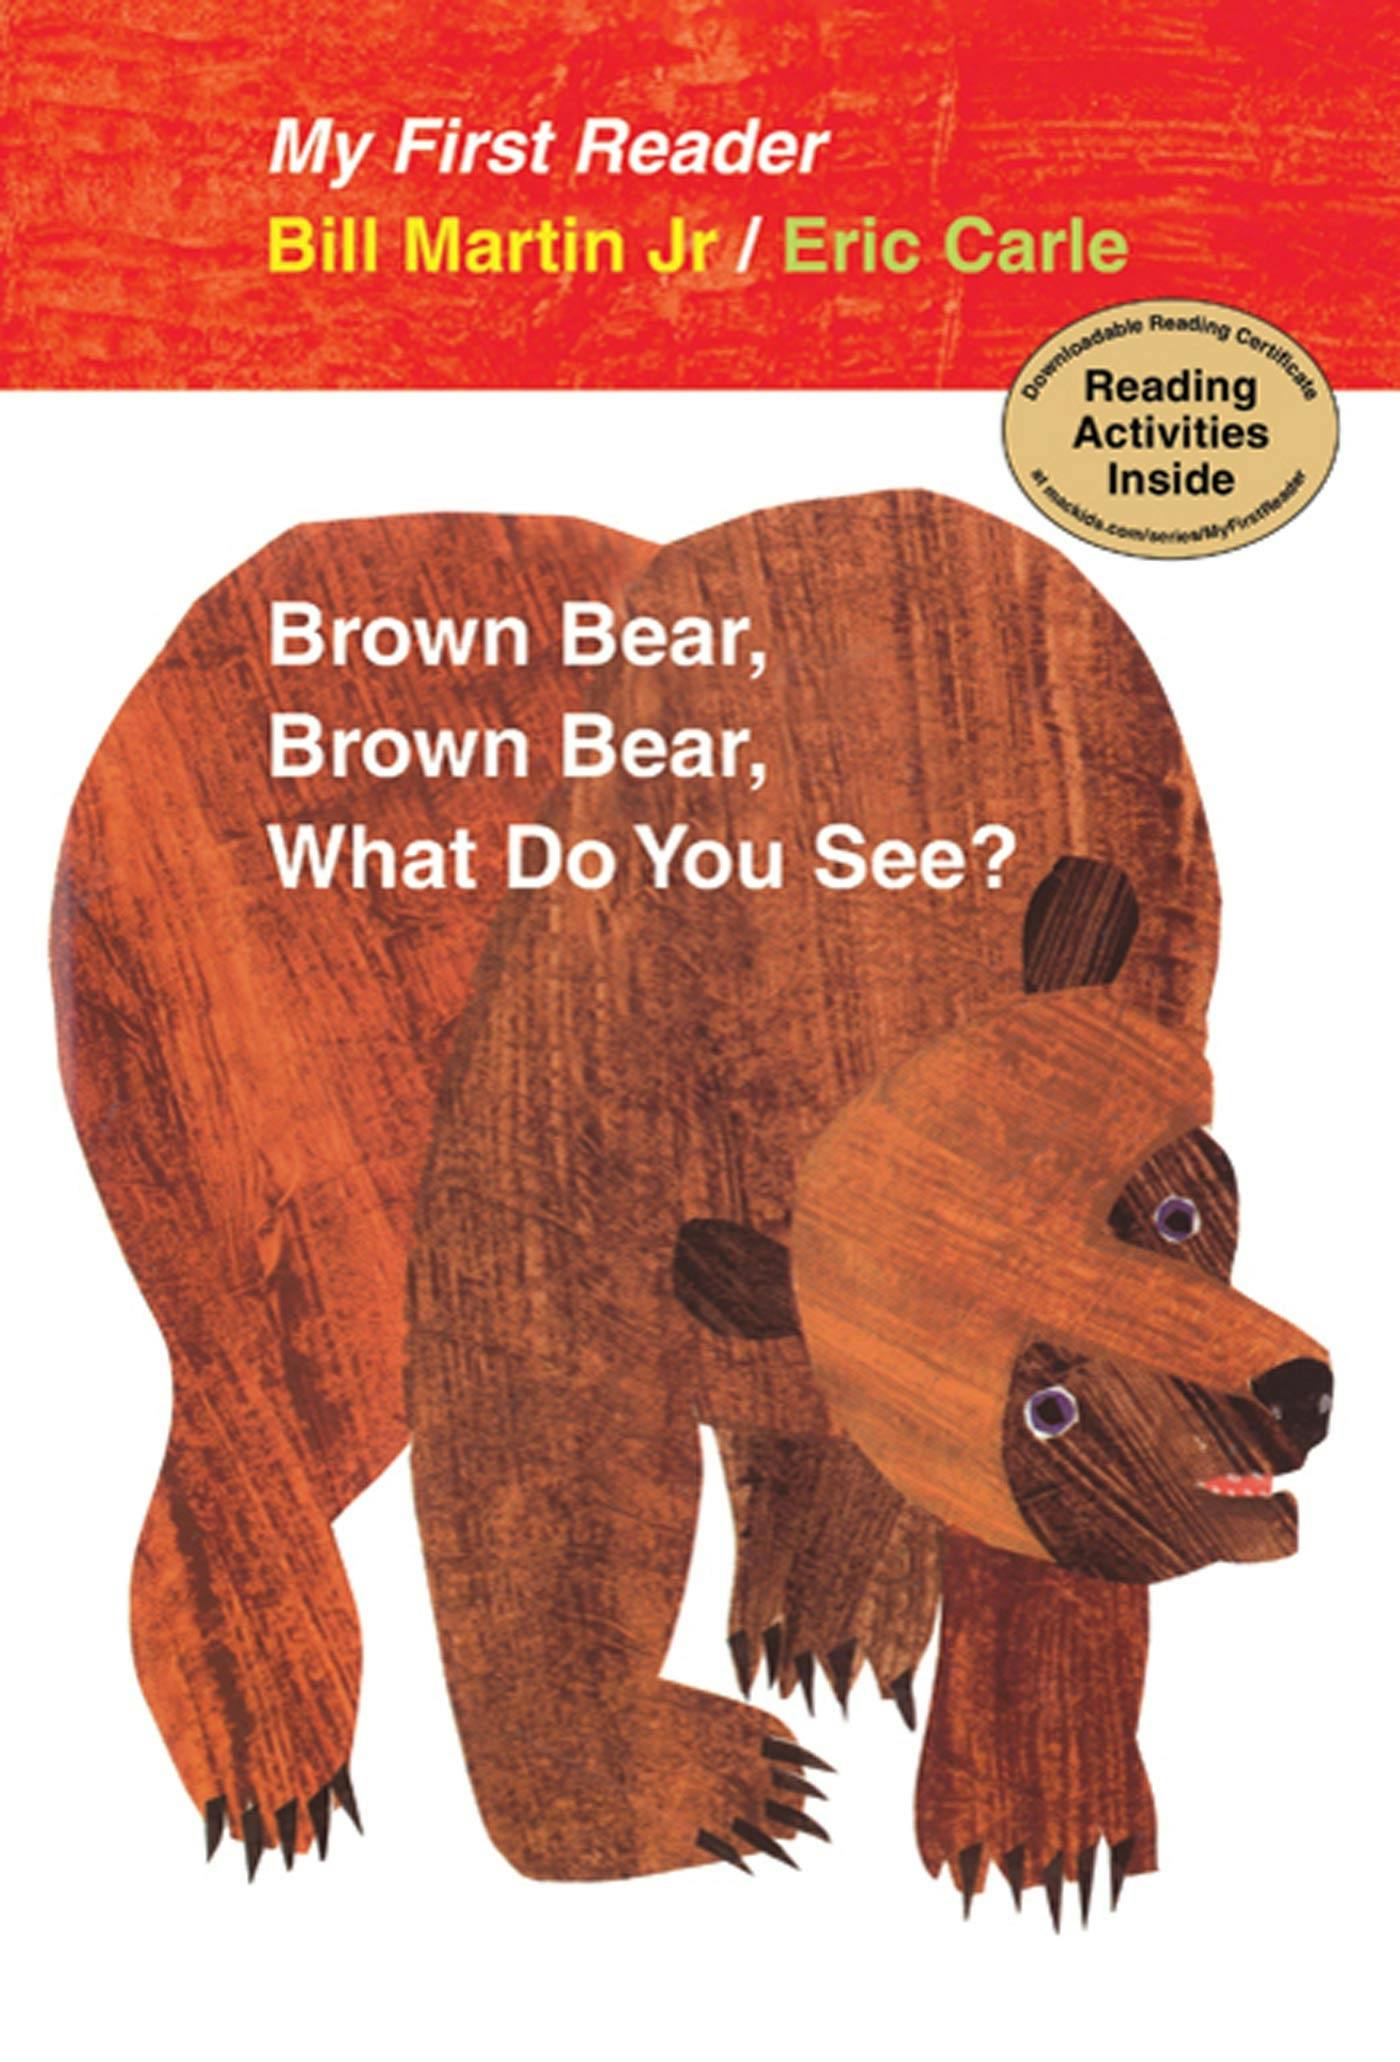 Image of Brown Bear, Brown Bear, What Do You See? My First Reader